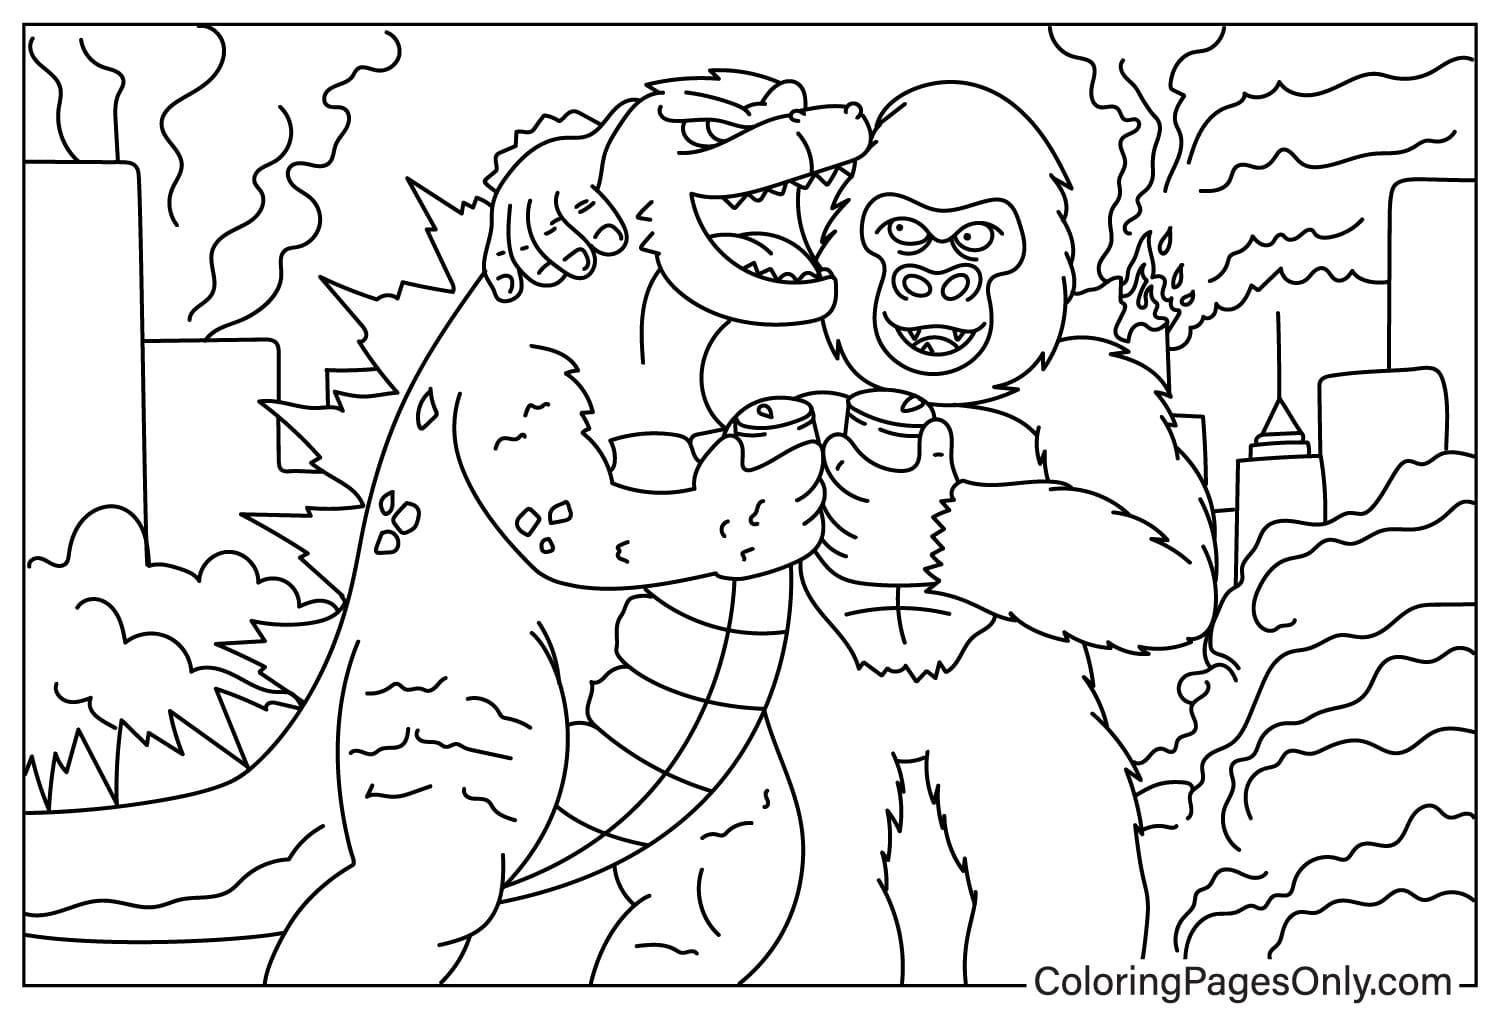 Godzilla x Kong- The New Empire to Color from Godzilla x Kong: The New Empire